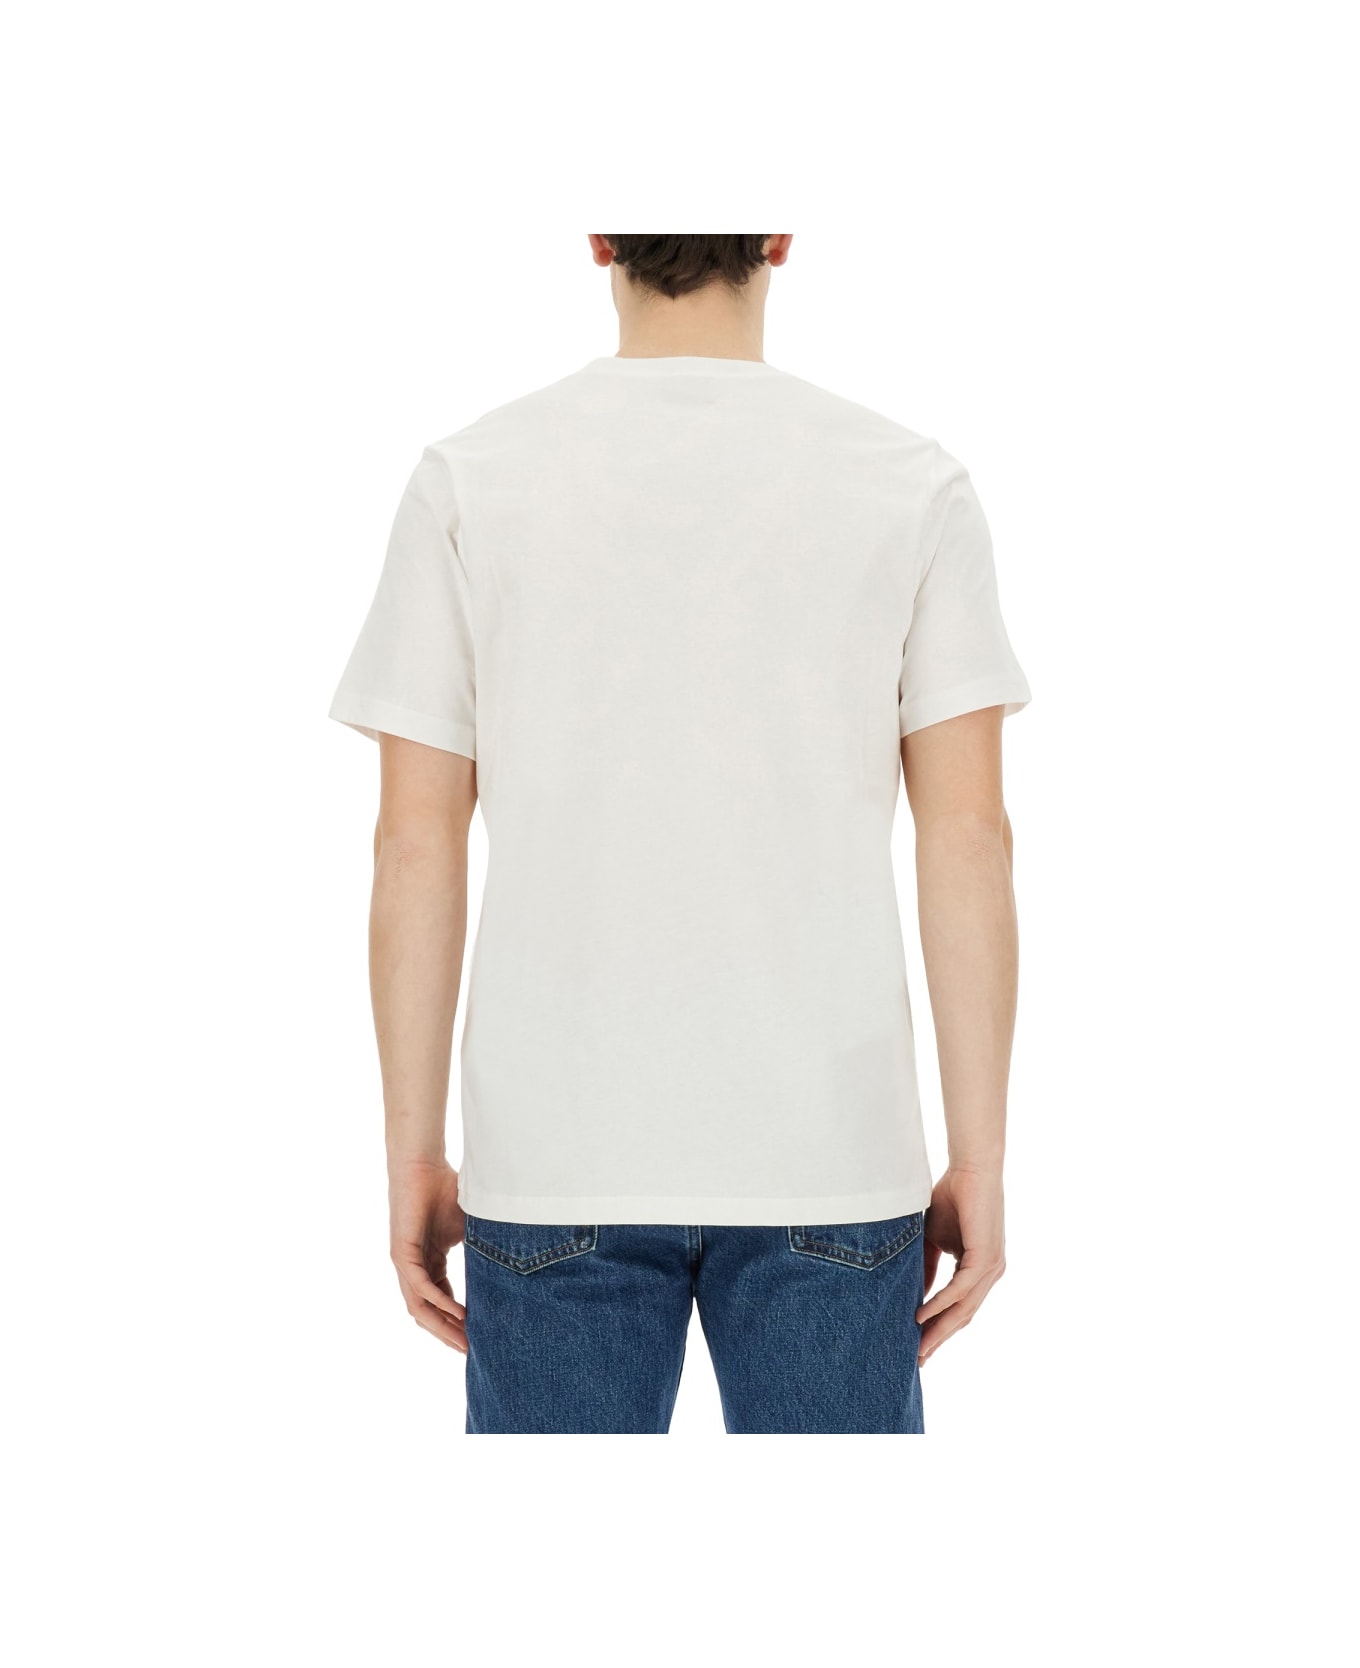 PS by Paul Smith "teddy" T-shirt - WHITE